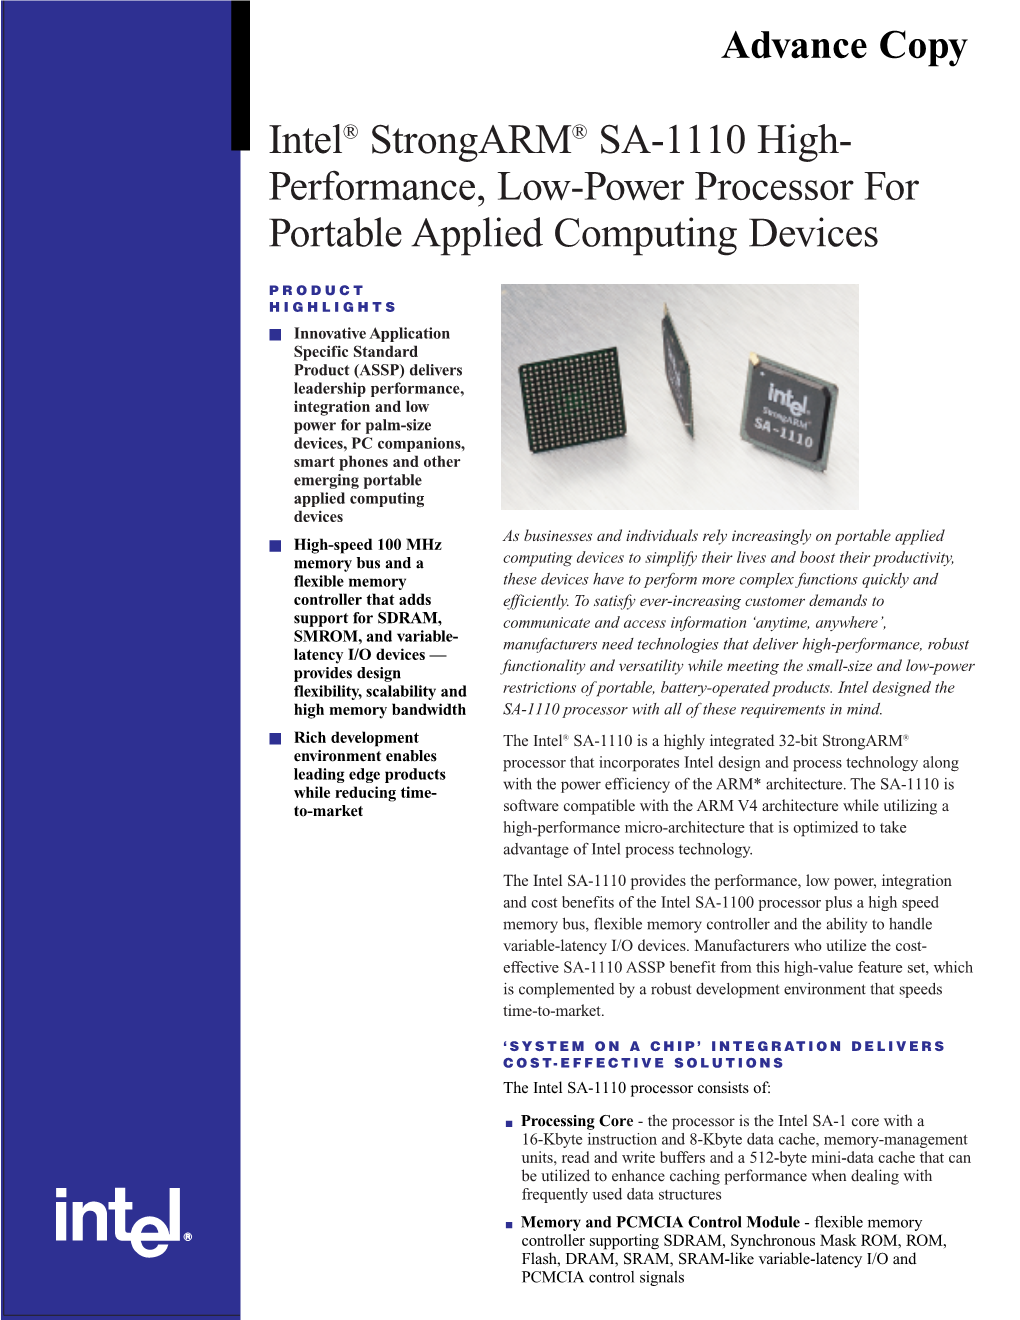 Intel® Strongarm® SA-1110 High- Performance, Low-Power Processor for Portable Applied Computing Devices